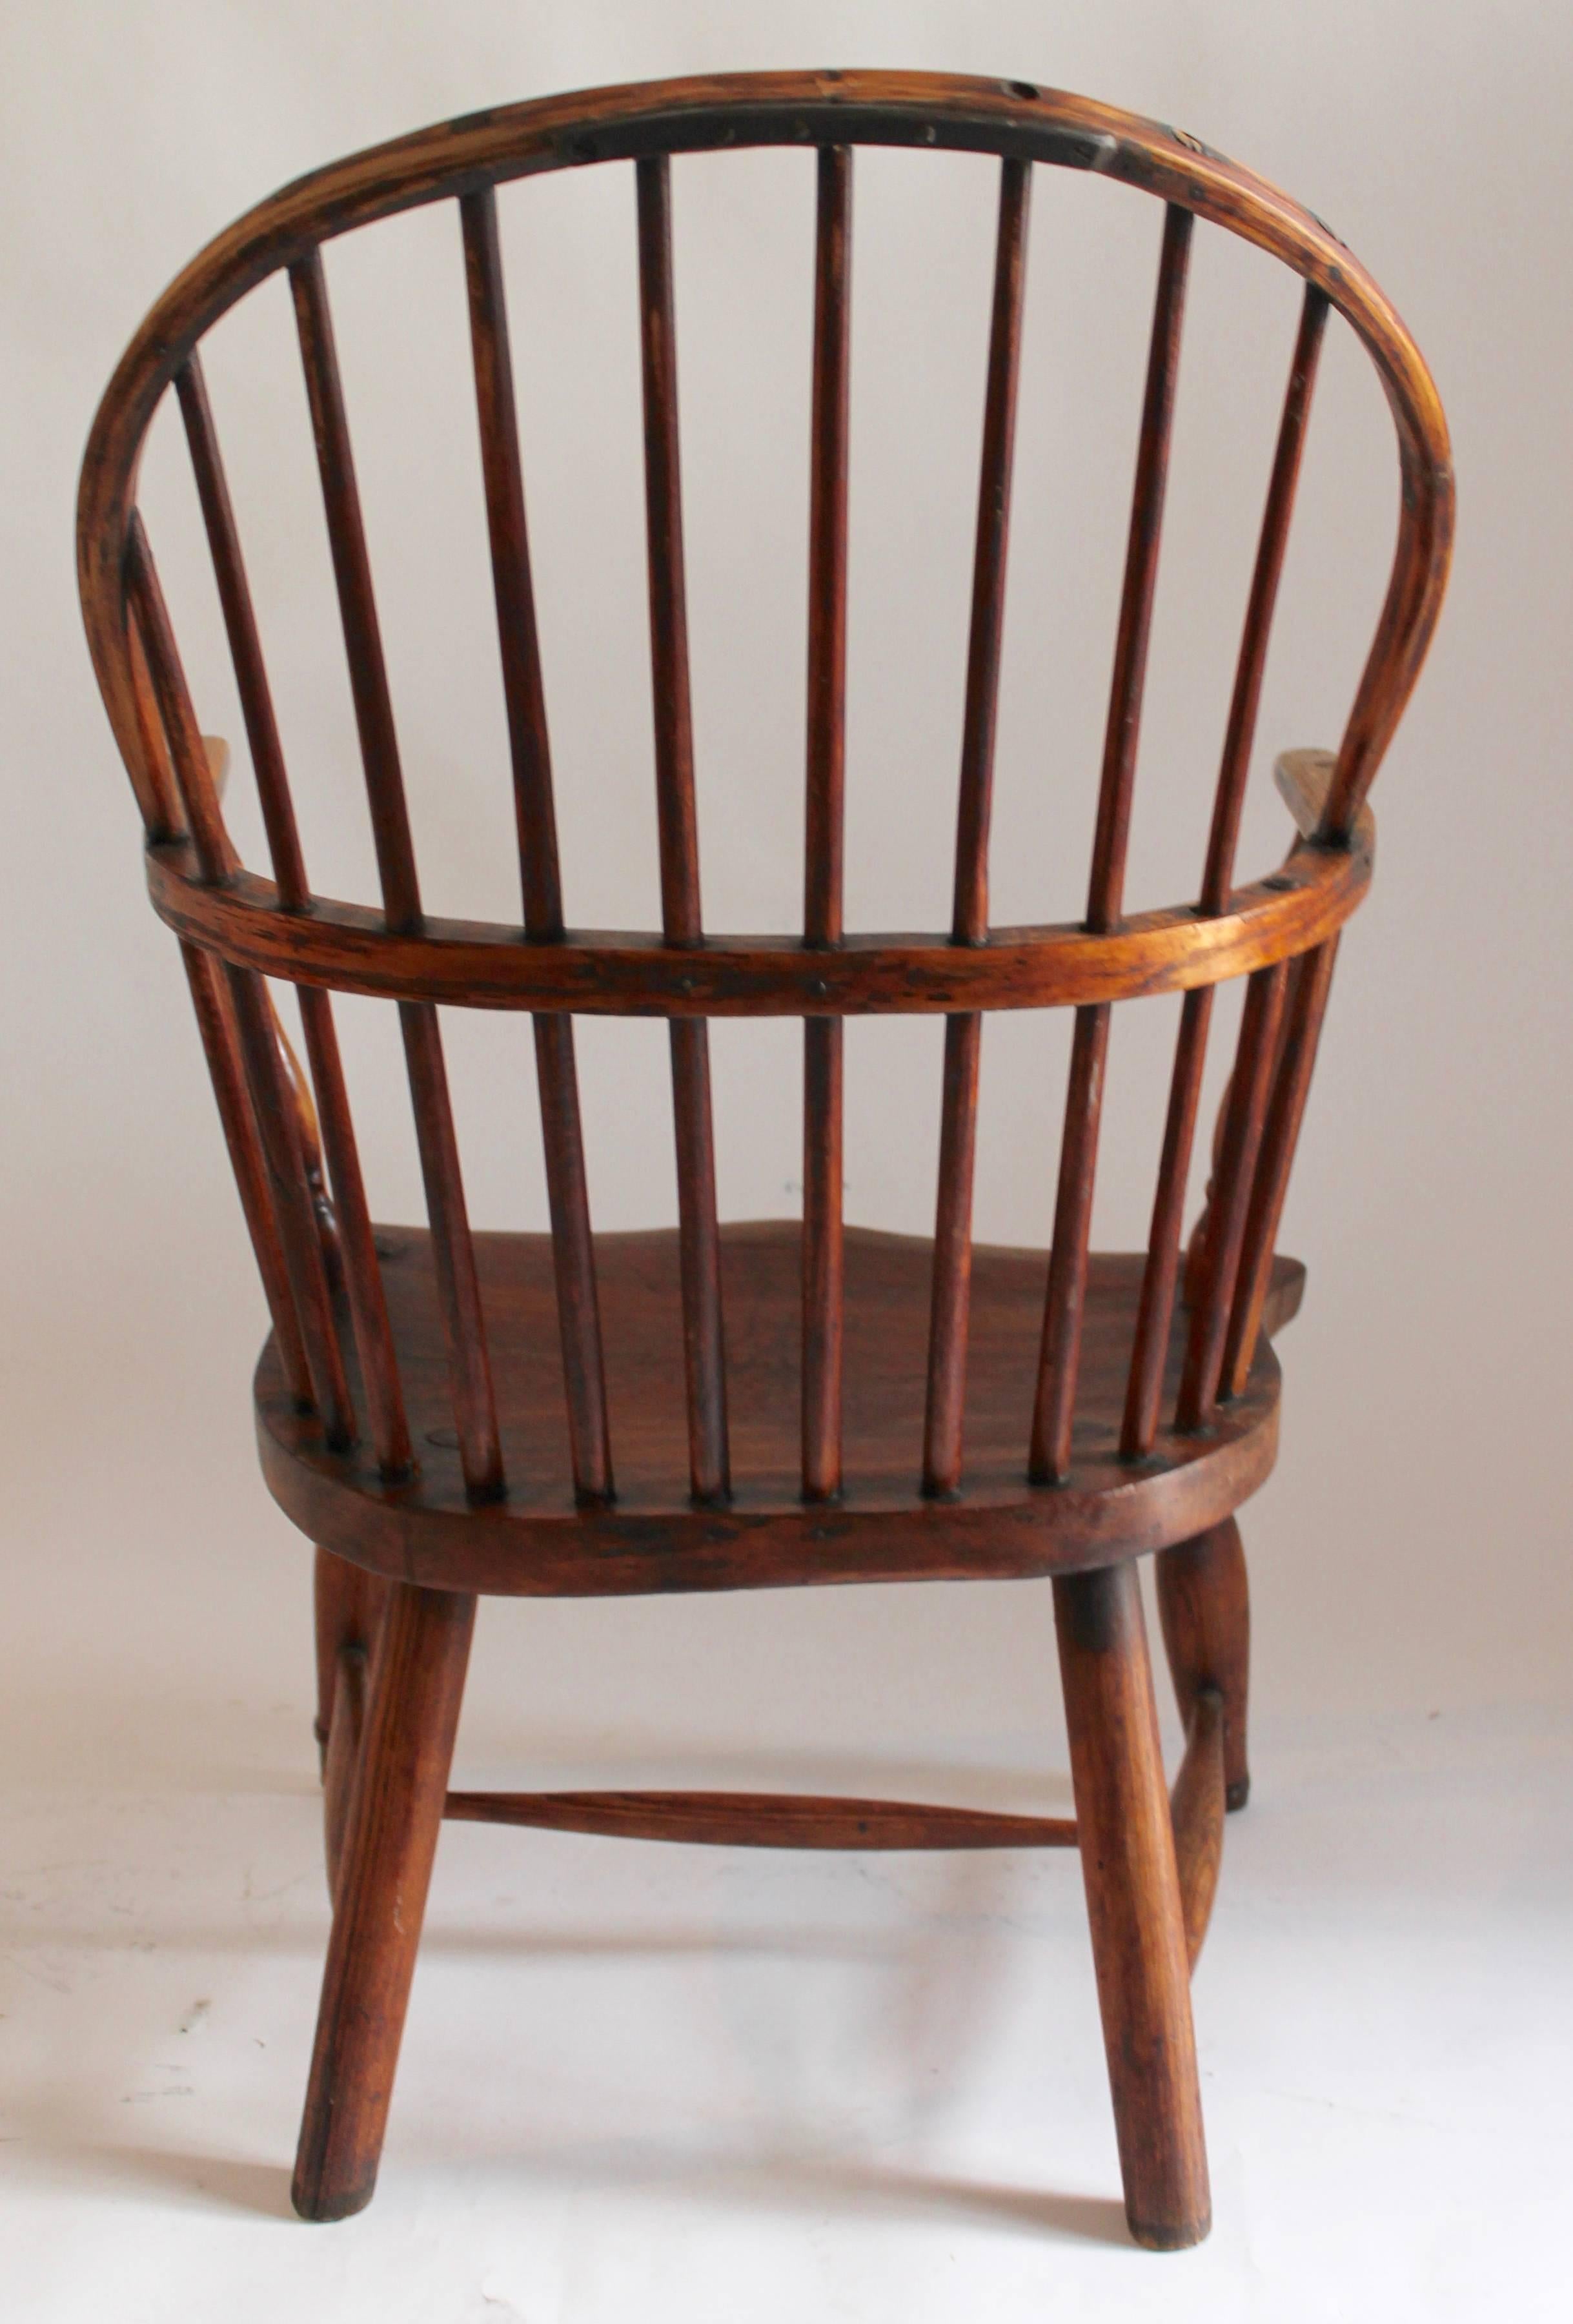 Country Early 18th Century English Windsor Chair